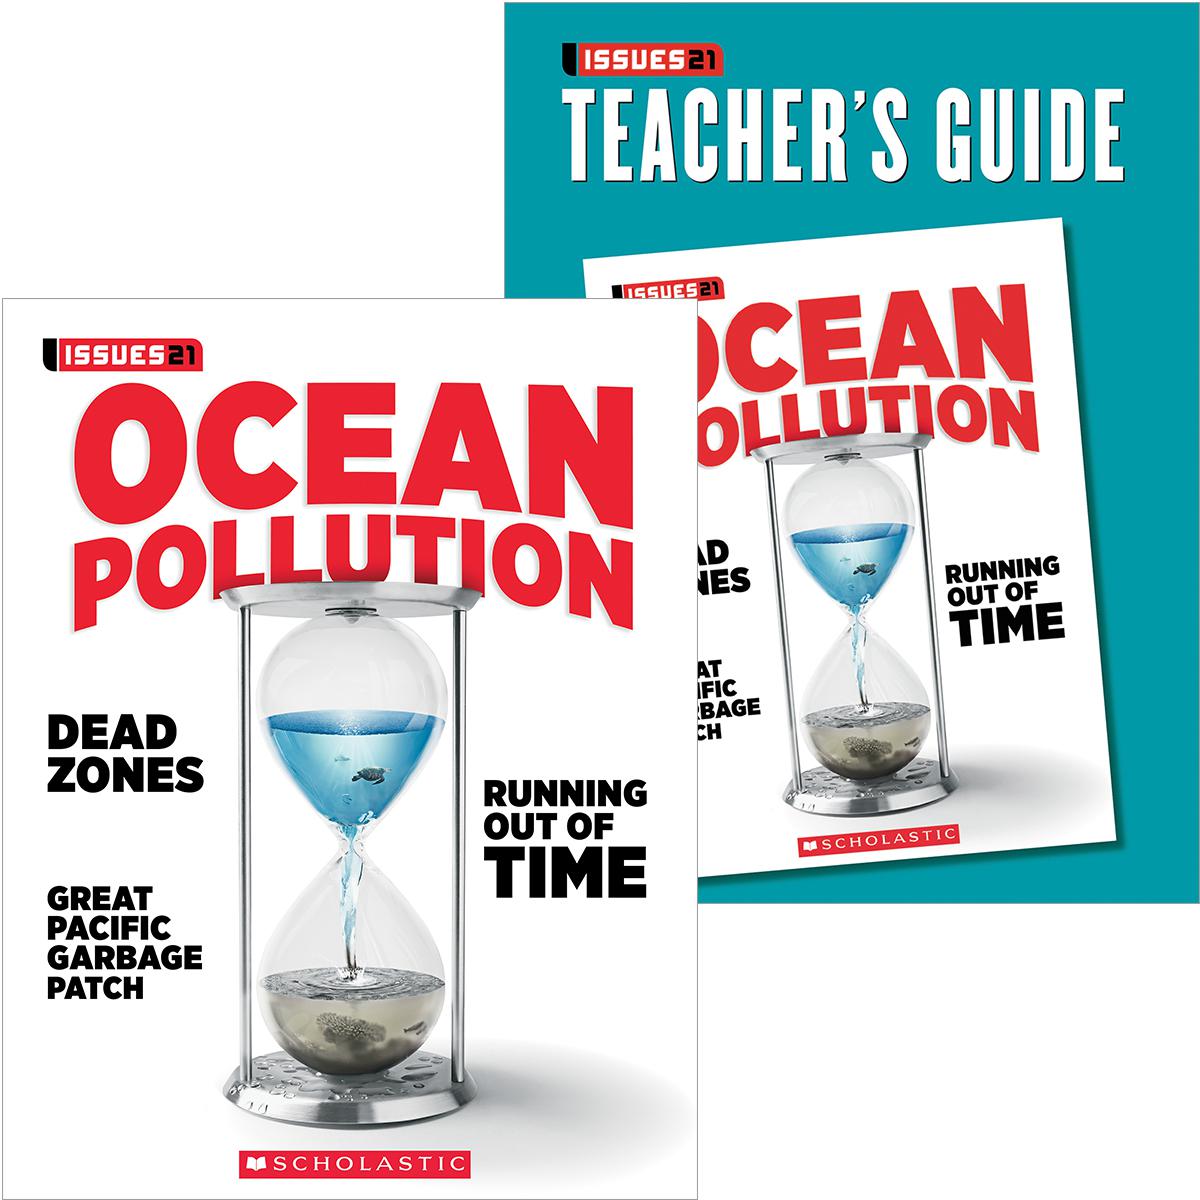  Issues 21: Ocean Pollution 6-Pack with Teaching Guide 